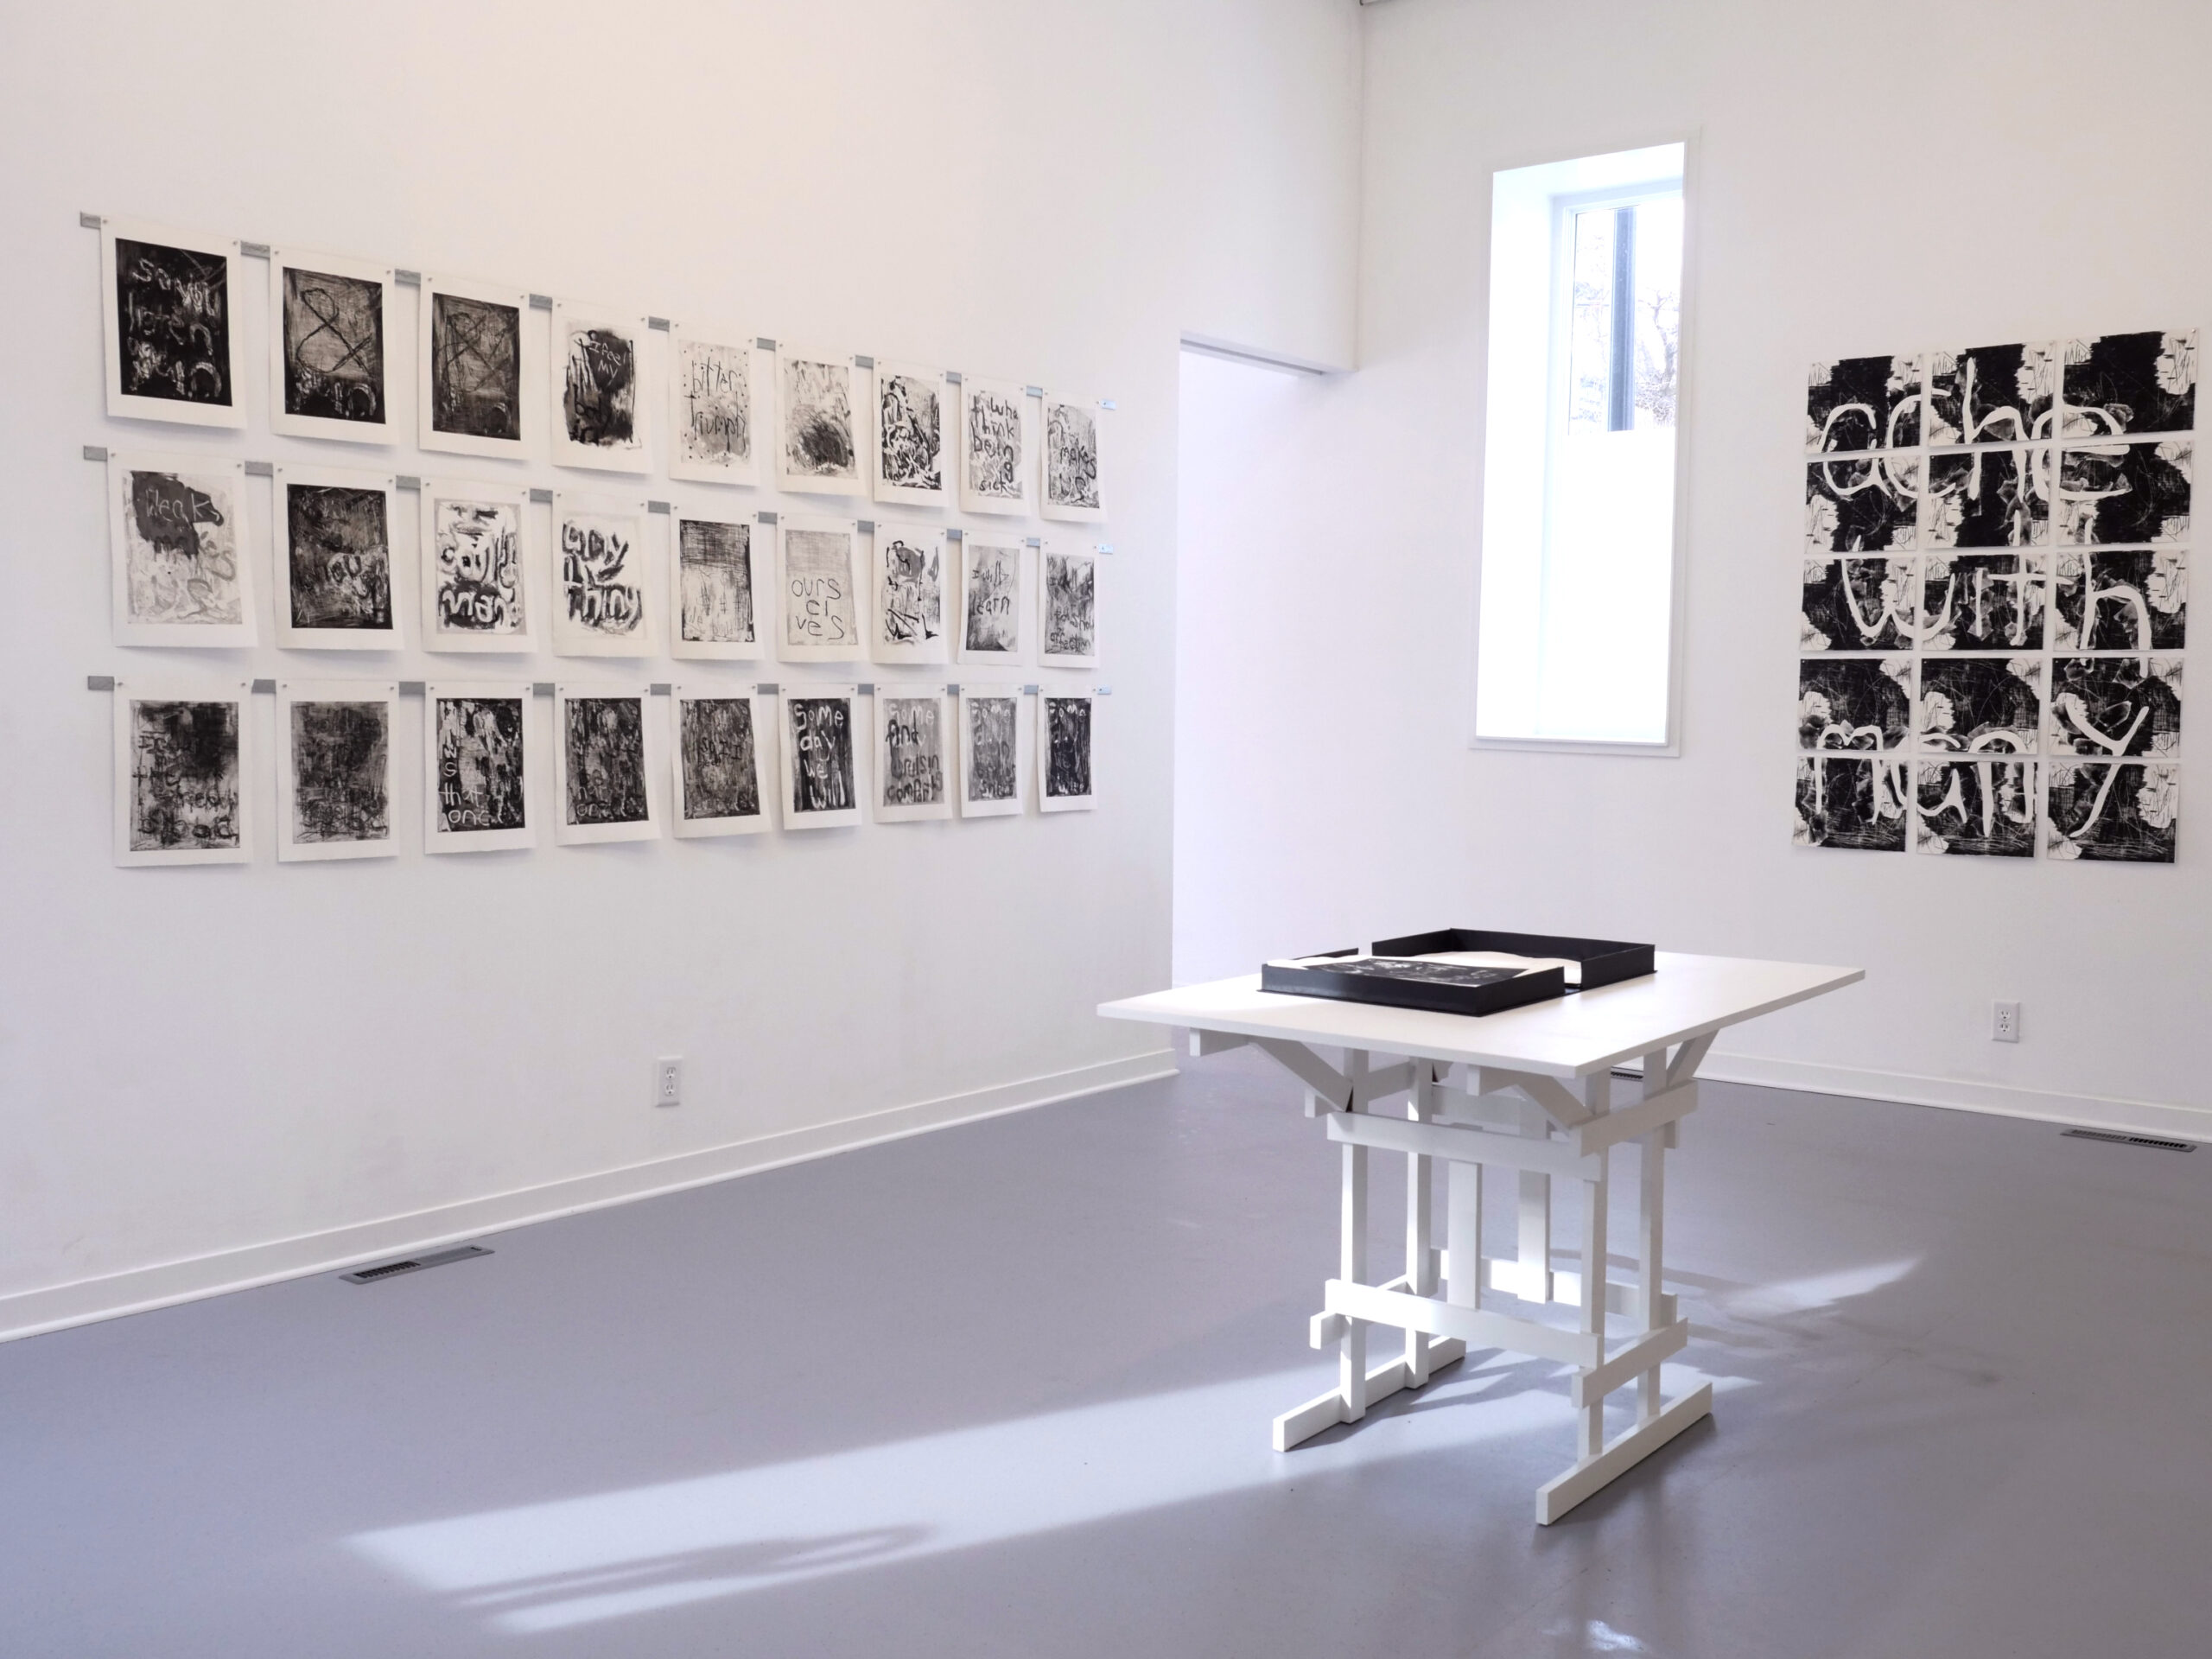 The interior of Dreamsong’s gallery, which has white walls and a flat gray floor. This image, taken from the corner of the room, shows prints hanging on two adjacent walls, and a white table in the center of the room. On top of the white table is a short black box, opened, with prints stacked inside.